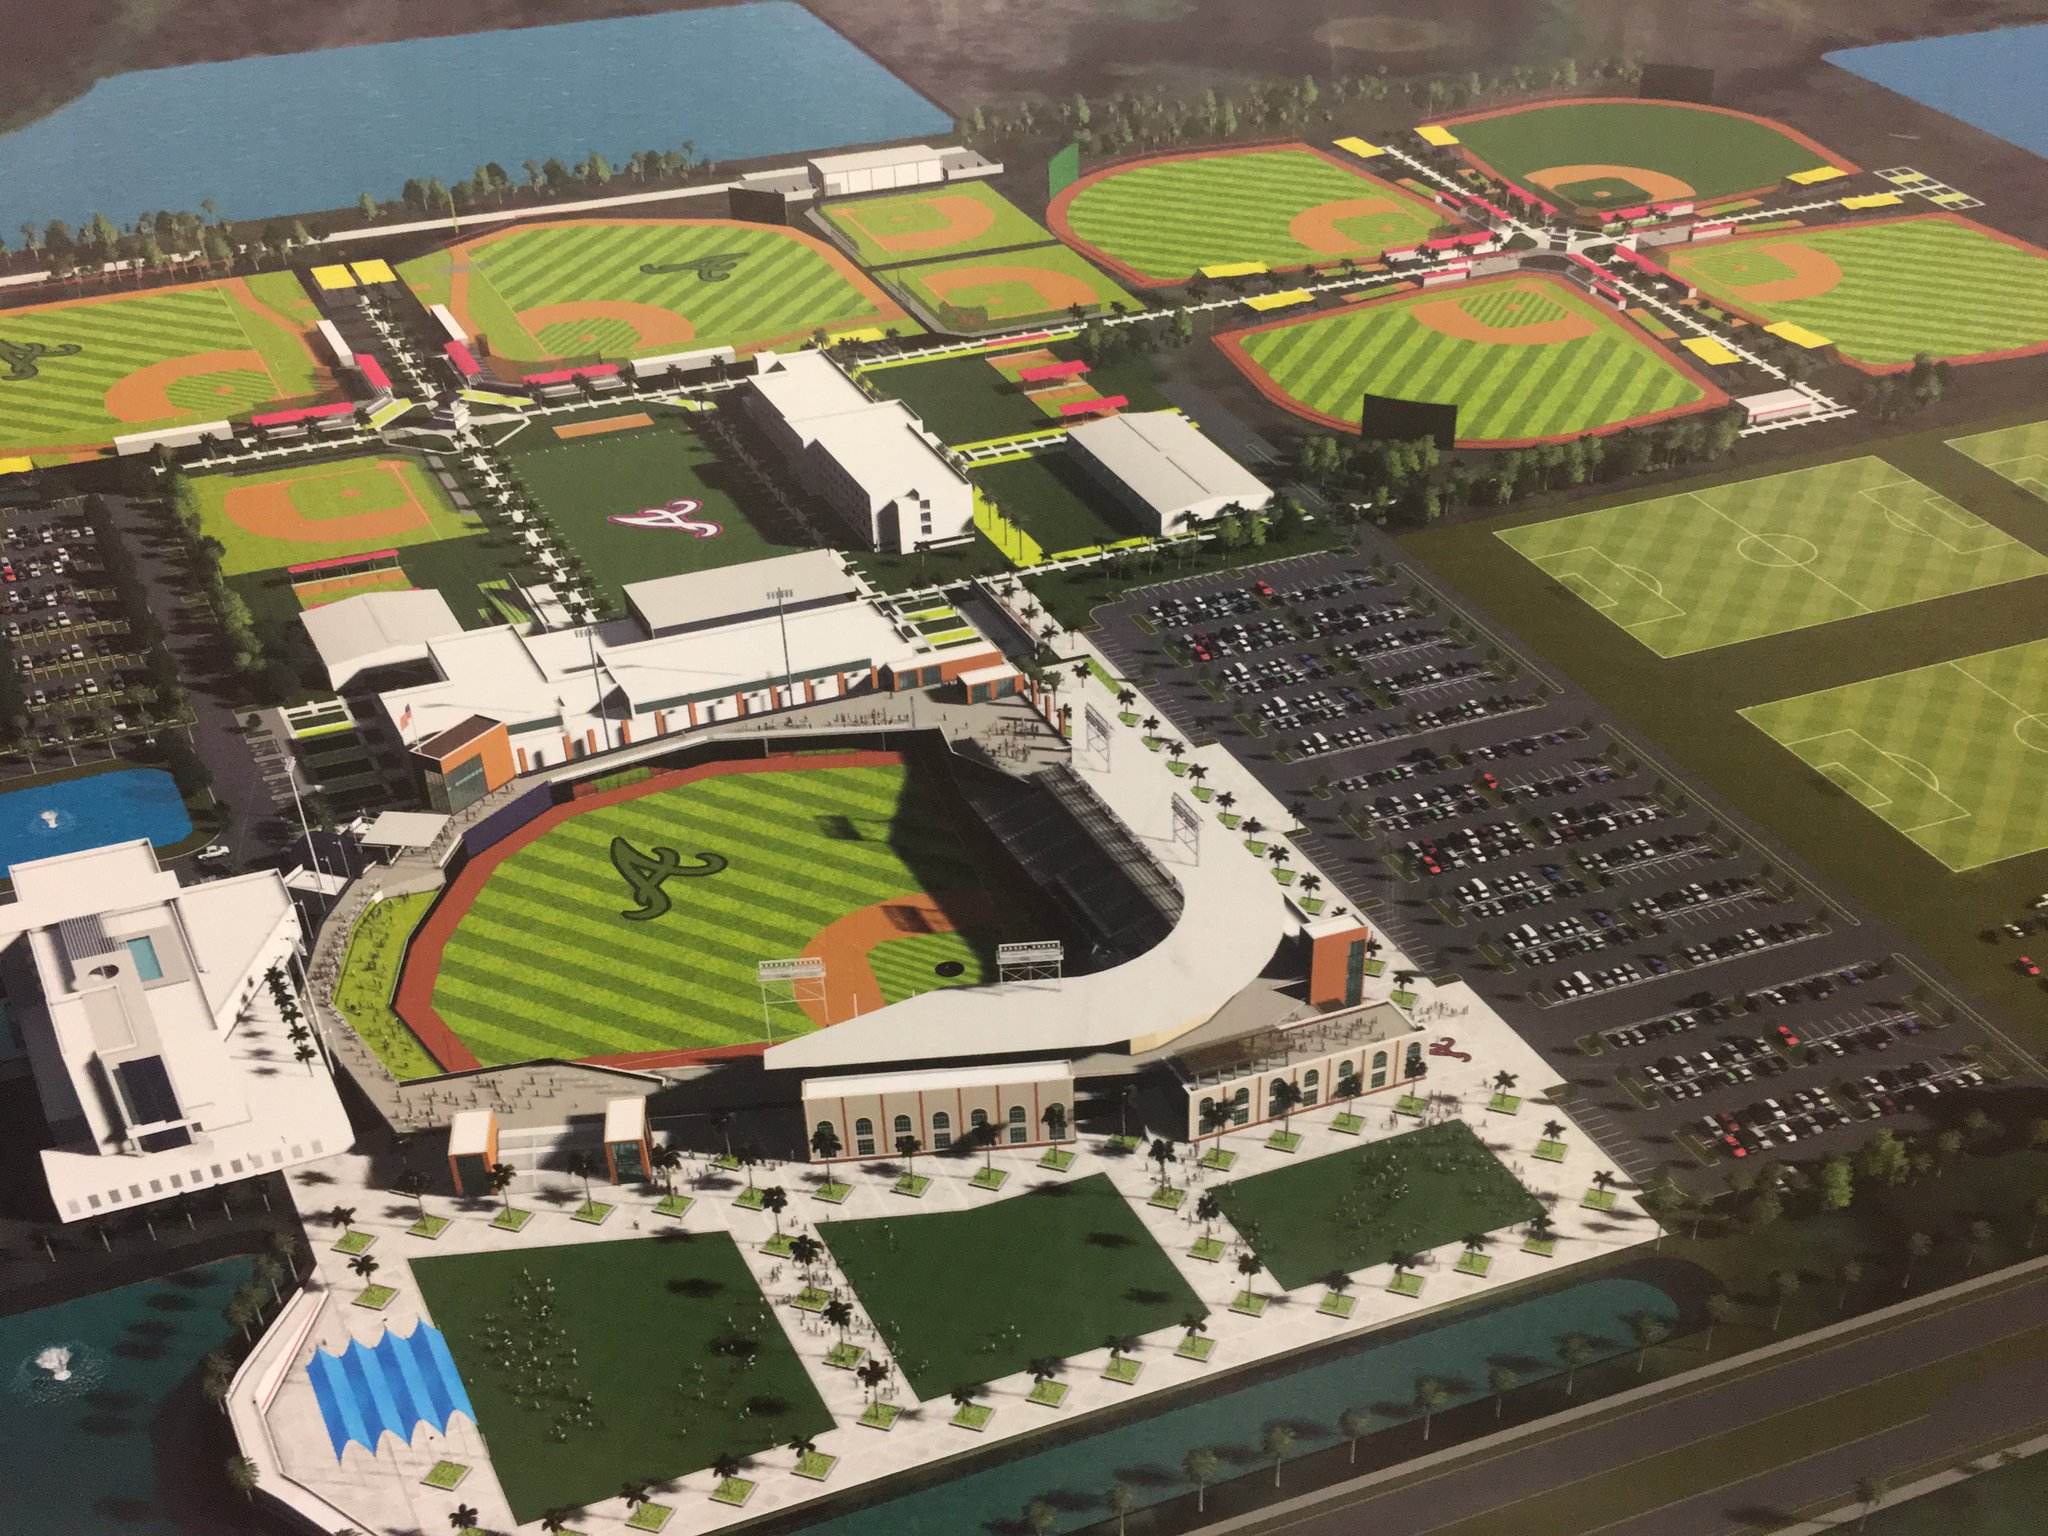 Braves' $100 million spring training facility approved, taxpayers will  cover almost half of cost